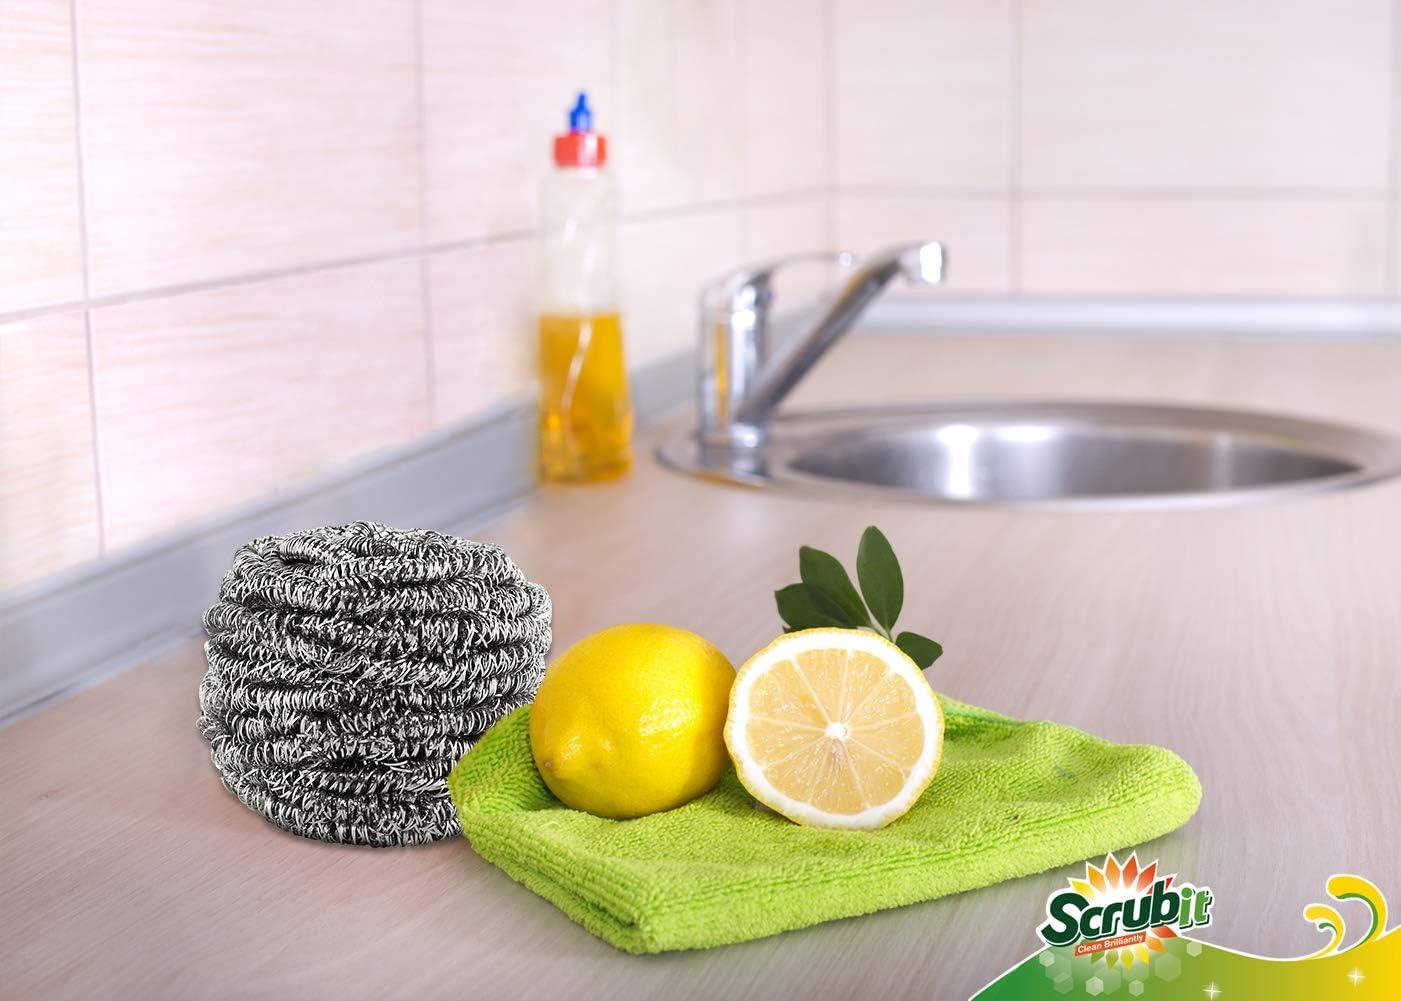 Premium Stainless Steel Scrubber, Steel Wool Pads, Kitchen Cleaner, Heavy Duty Cleaning Supplies - Especially for Tough Cleaning